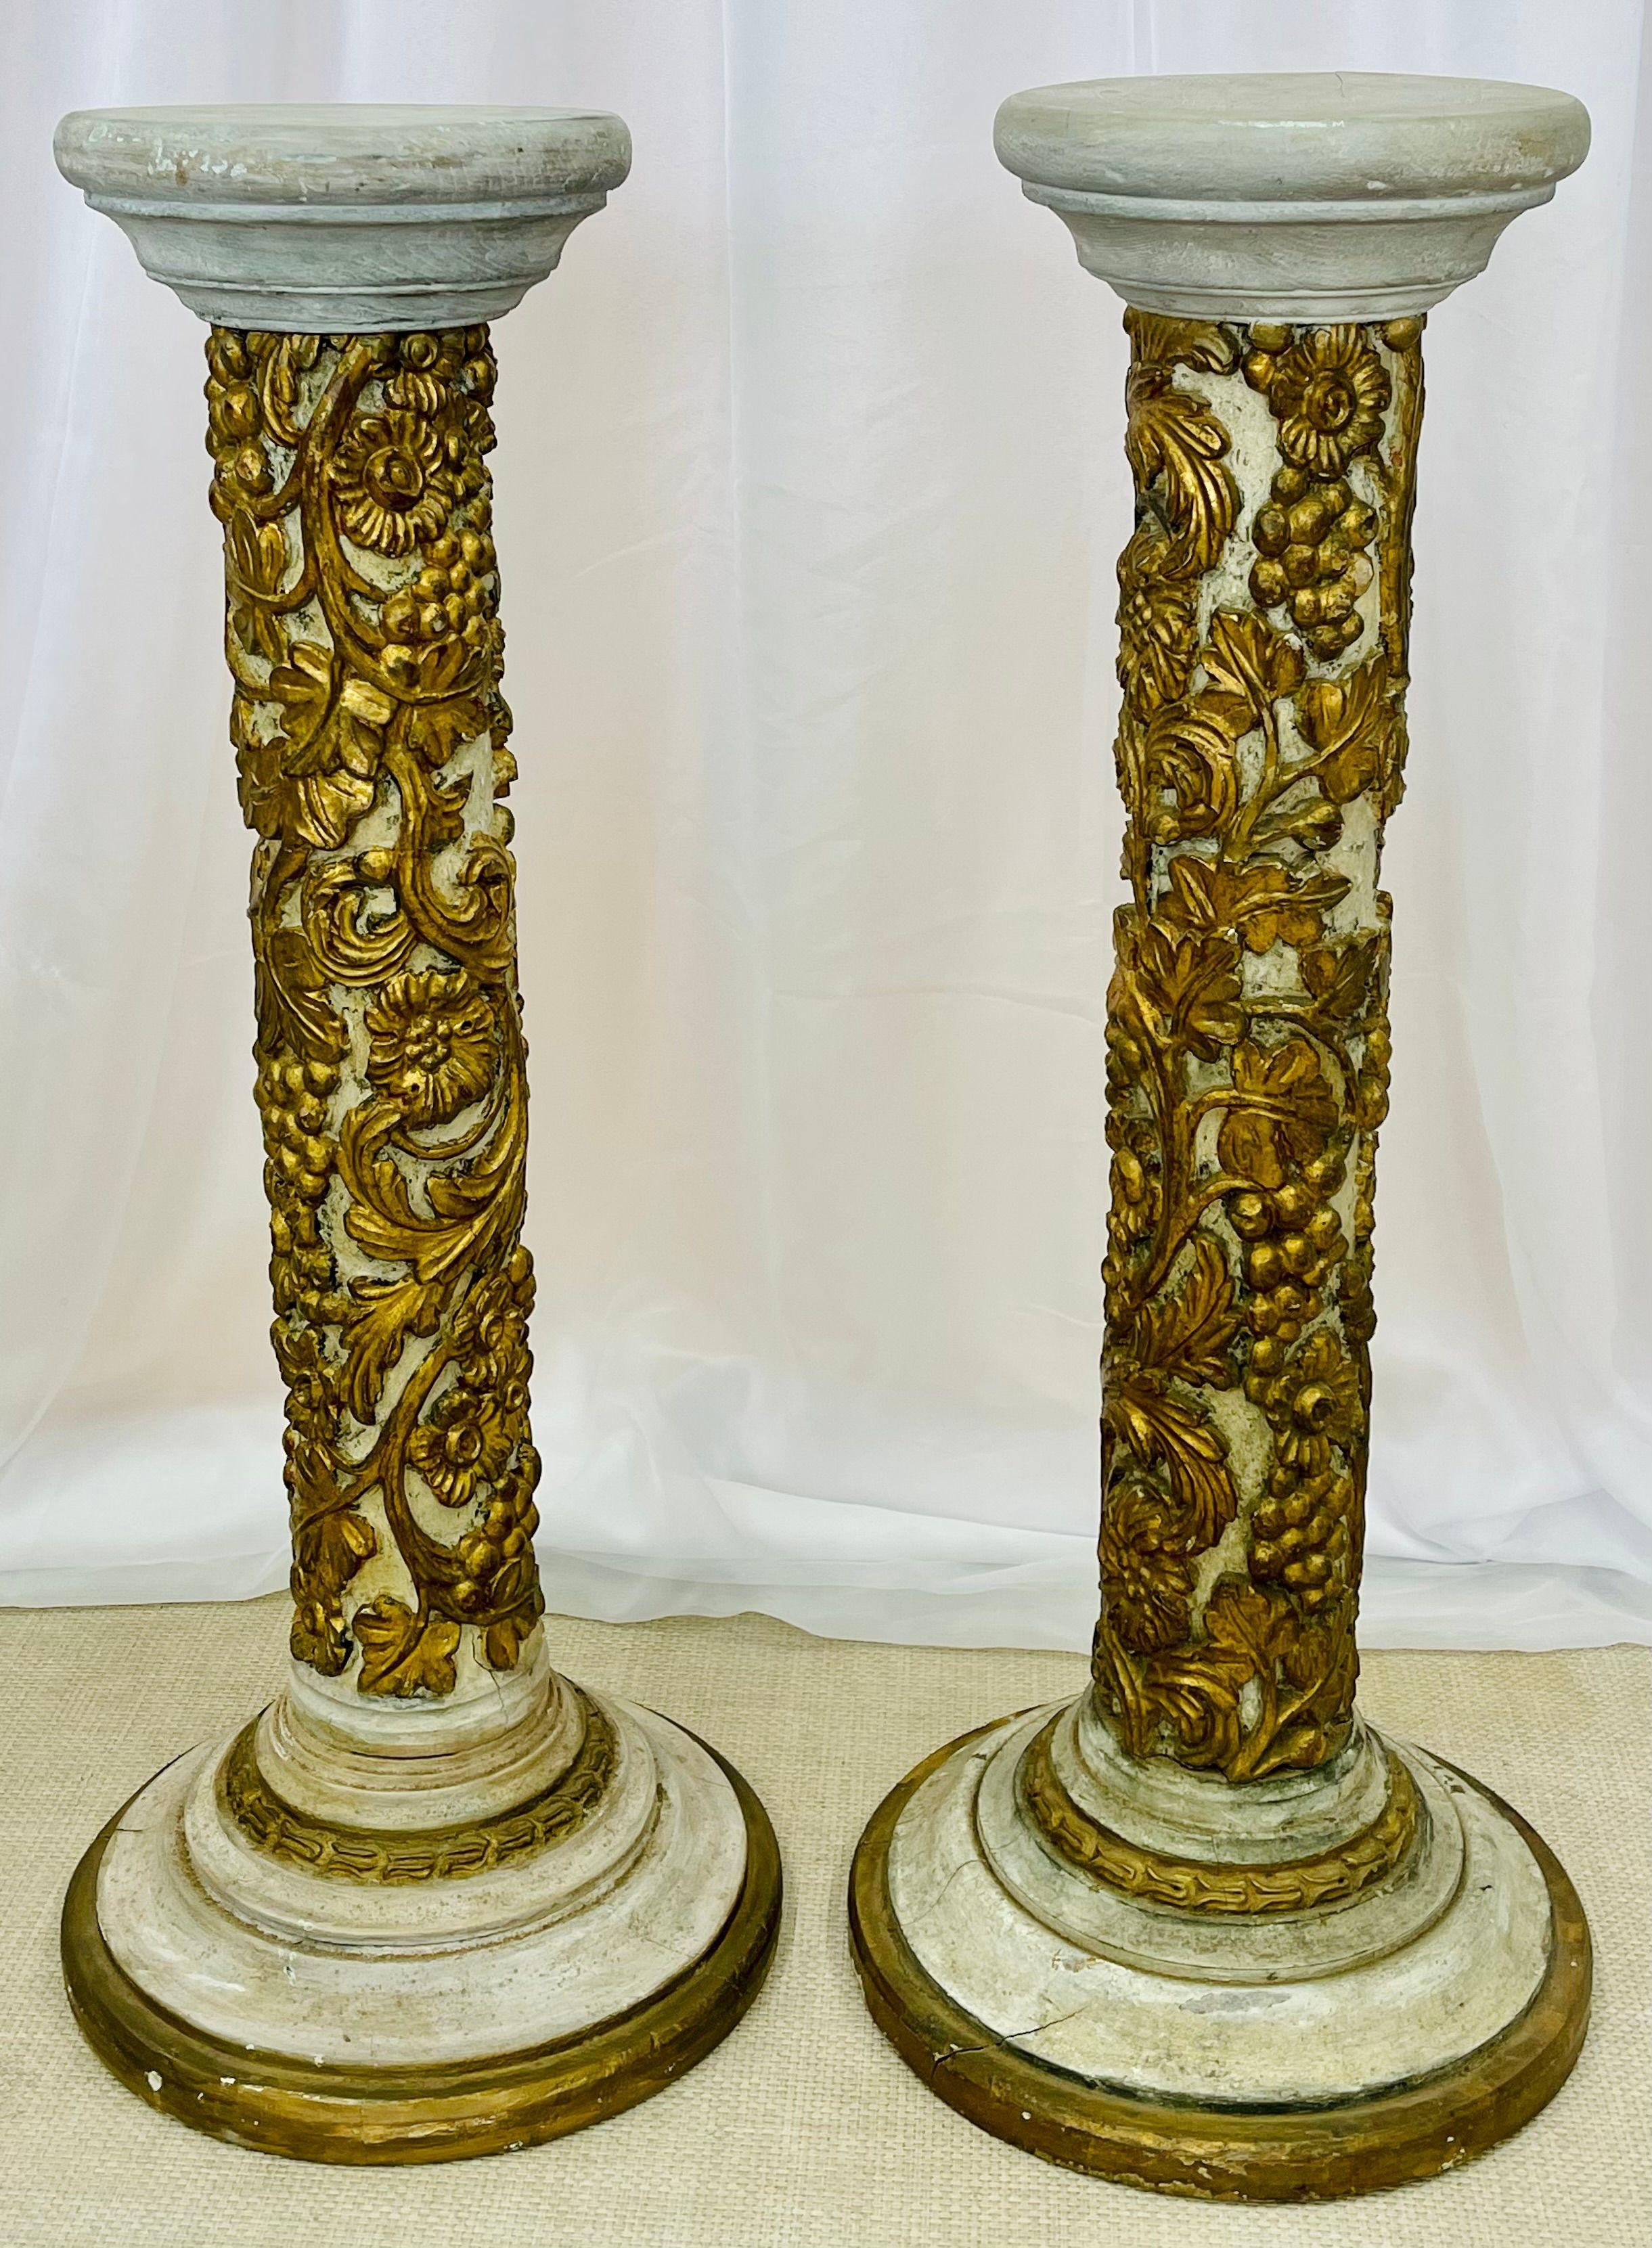 Pair of Table Top Diminutive Decorative Giltwood and Paint Decorated Italian Columns, Gustavian Style, 19th Century Europe. This fine pair of painted and gilt wood columns or pedestals are simply spectacular. Each having all around hand carvings